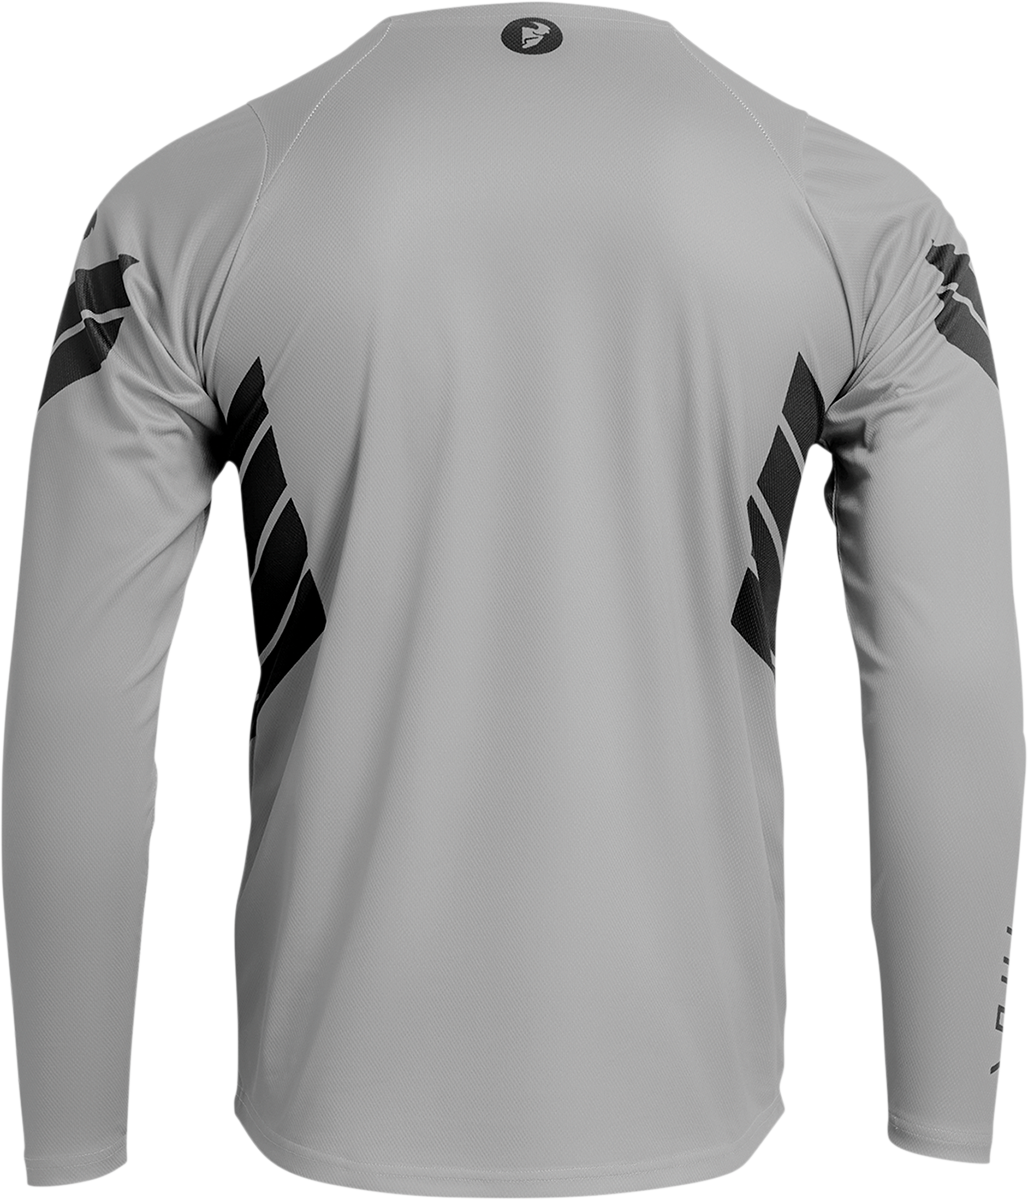 THOR Assist Sting Long-Sleeve Jersey - Gray - XS 5020-0037